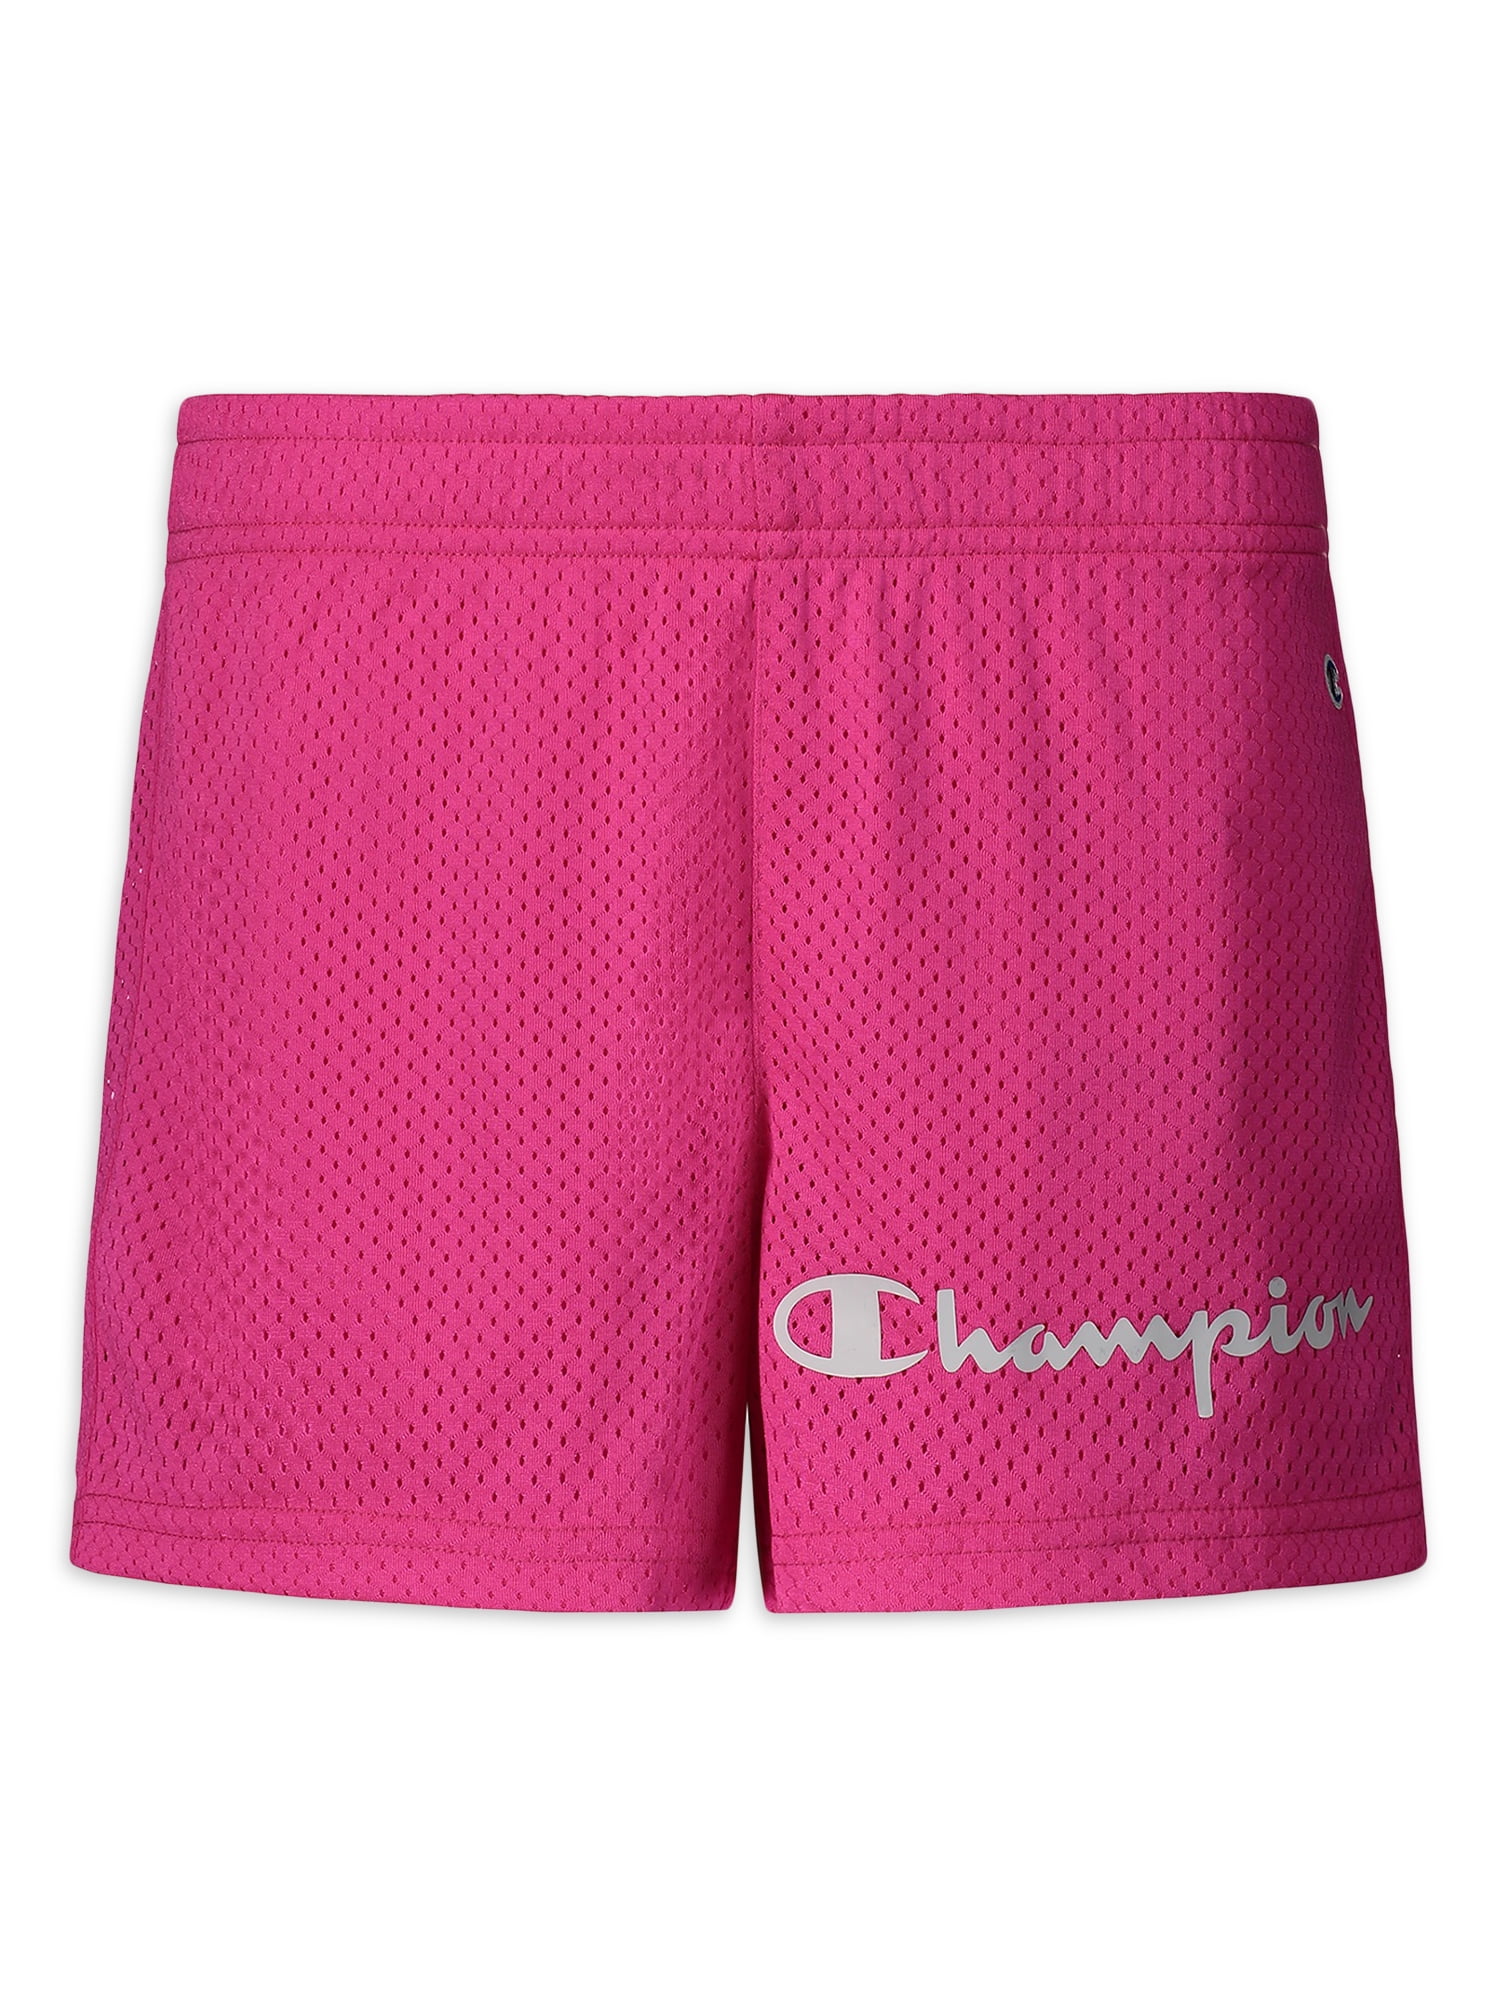 NEW Umbro Soccer Athletic Gym Shorts Pink Youth Small 8-10 